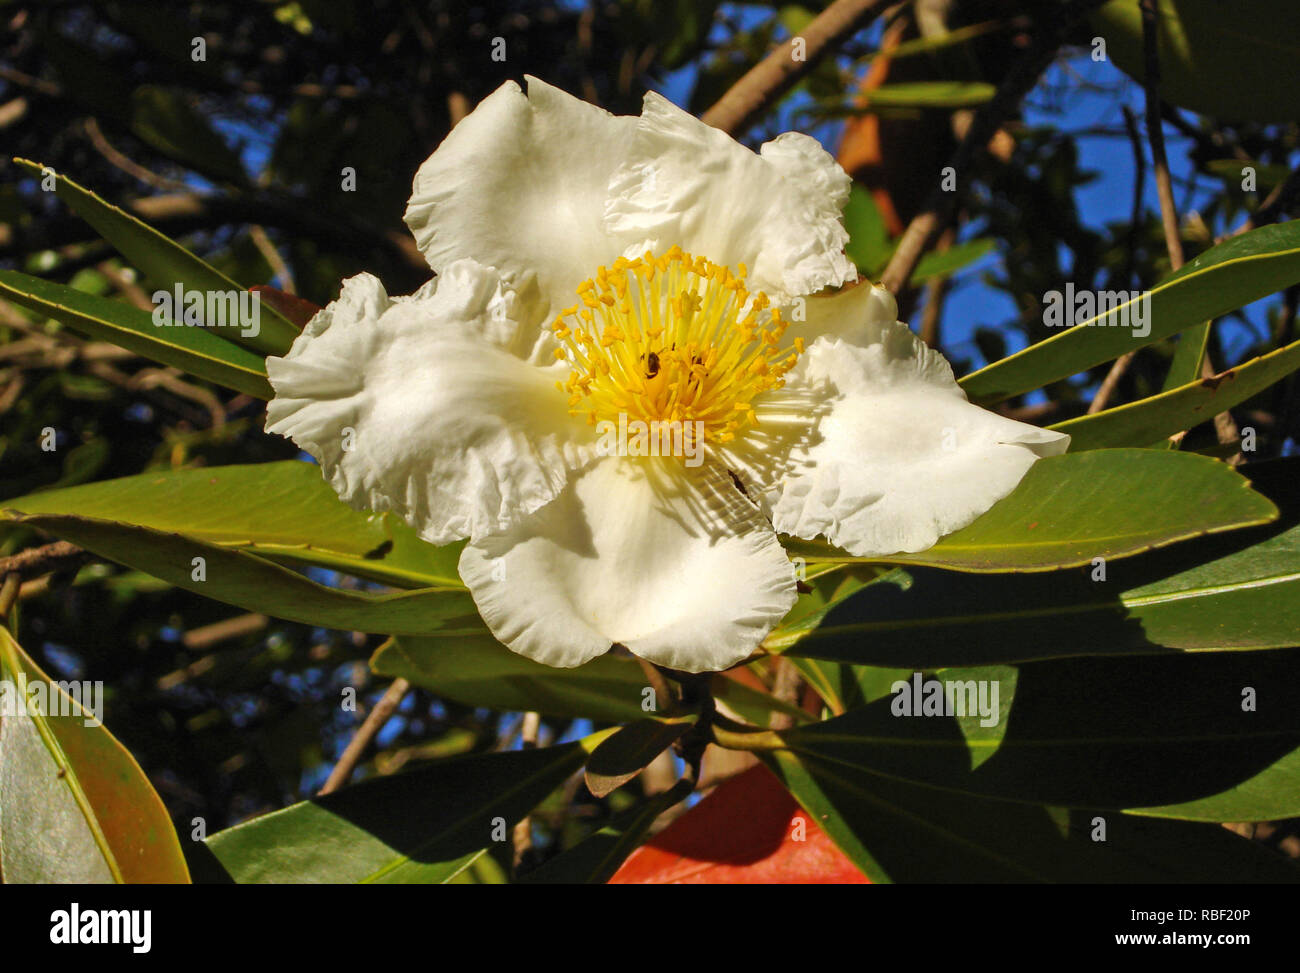 Fried Egg Tree, Gordonia axillaris, gets its common name from the spectacular show of white petalled, yellow-centred flowers. Stock Photo